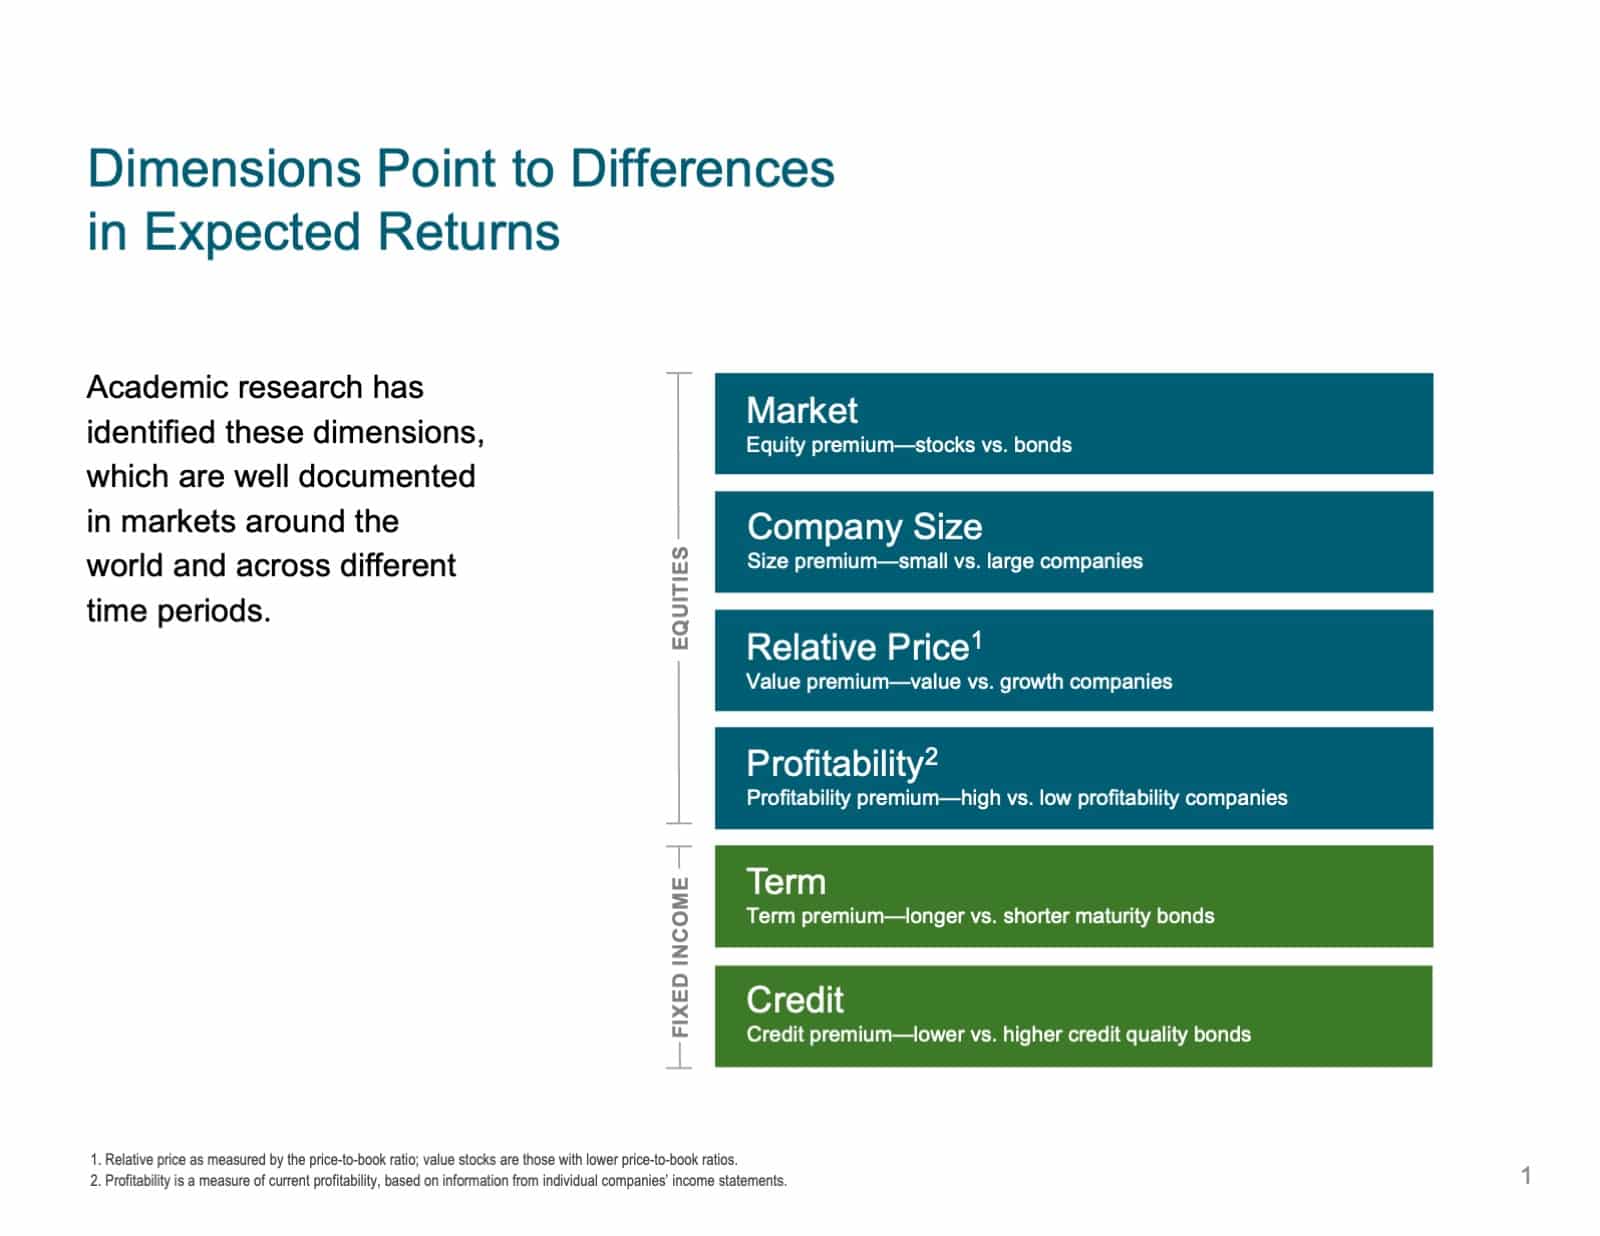 Dimensions Point to Differences in Expected Returns